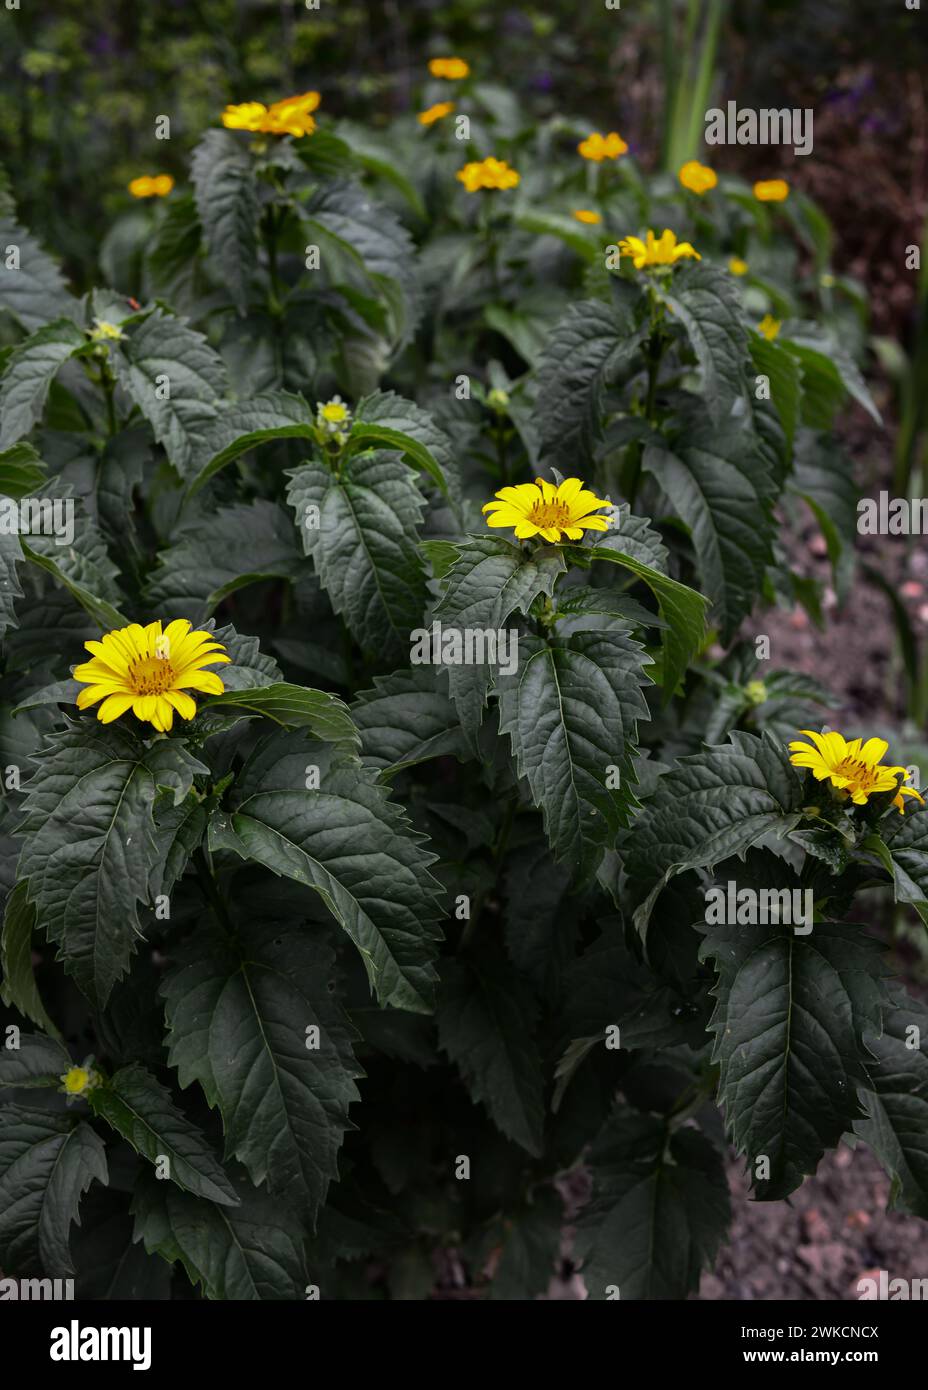 Bright yellow Heliopsis flowers bloom in the garden. Stock Photo